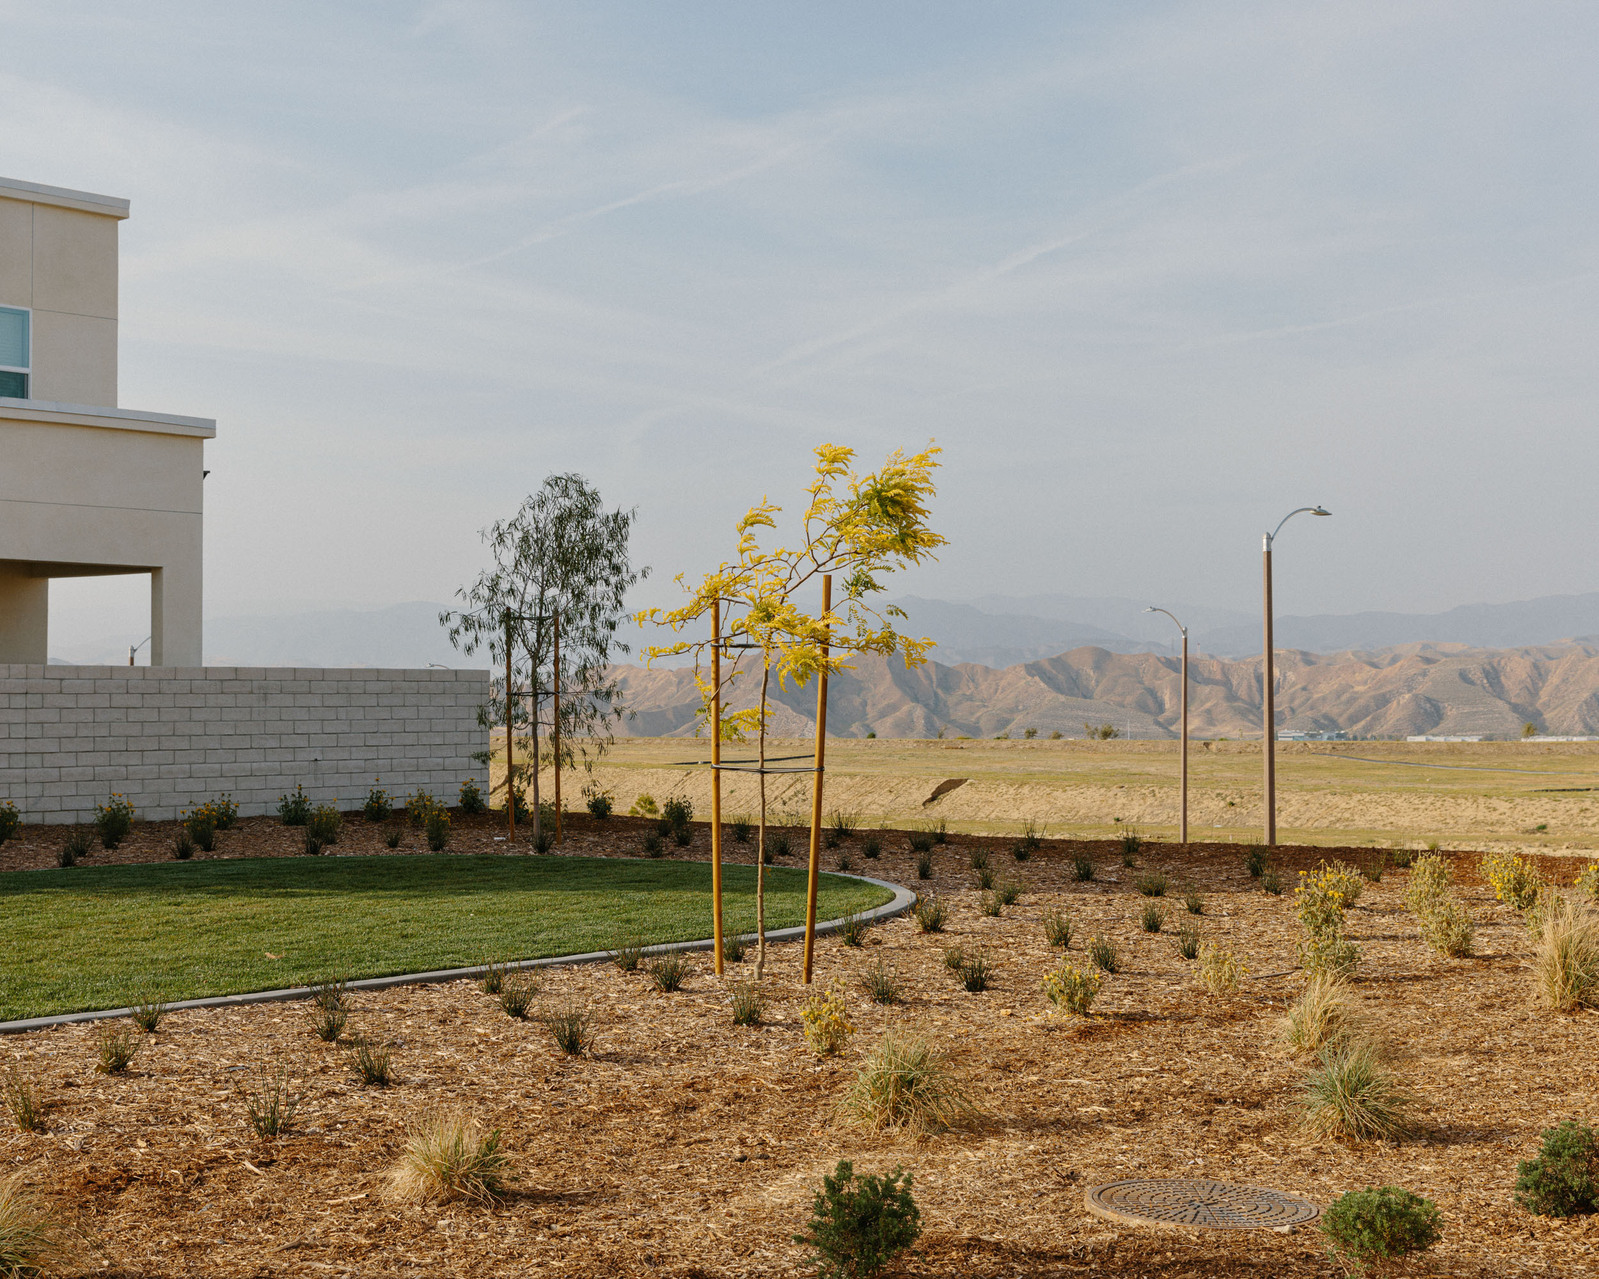 Can Sustainable Suburbs Save Southern California? / Photos by Stella Kalinina for The New Yorker